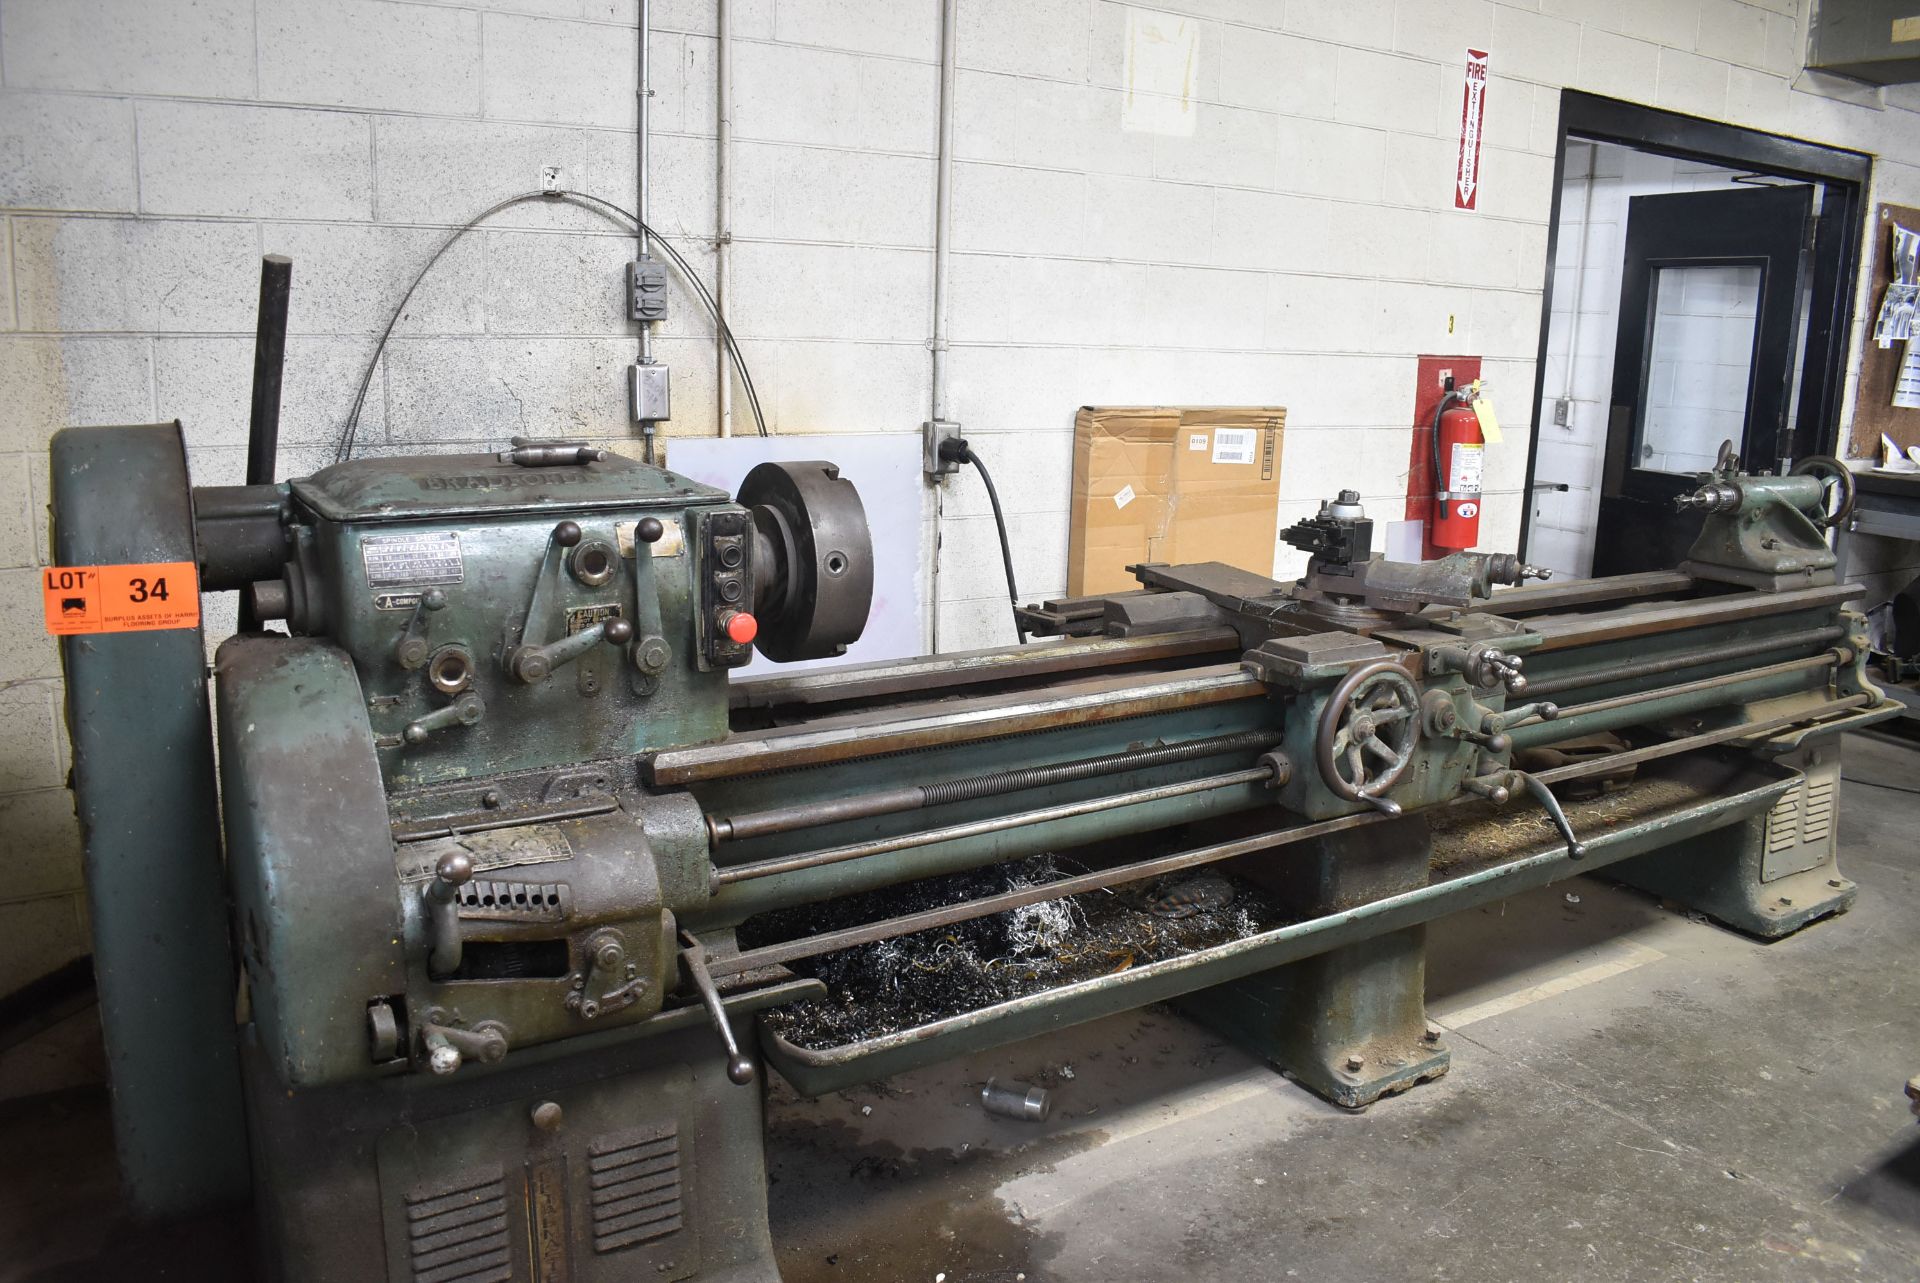 BRADFORD 18X100 ENGINE LATHE 18" SWING OVER BED, 100" DISTANCE BETWEEN CENTERS, 1.5" SPINDLE BORE,